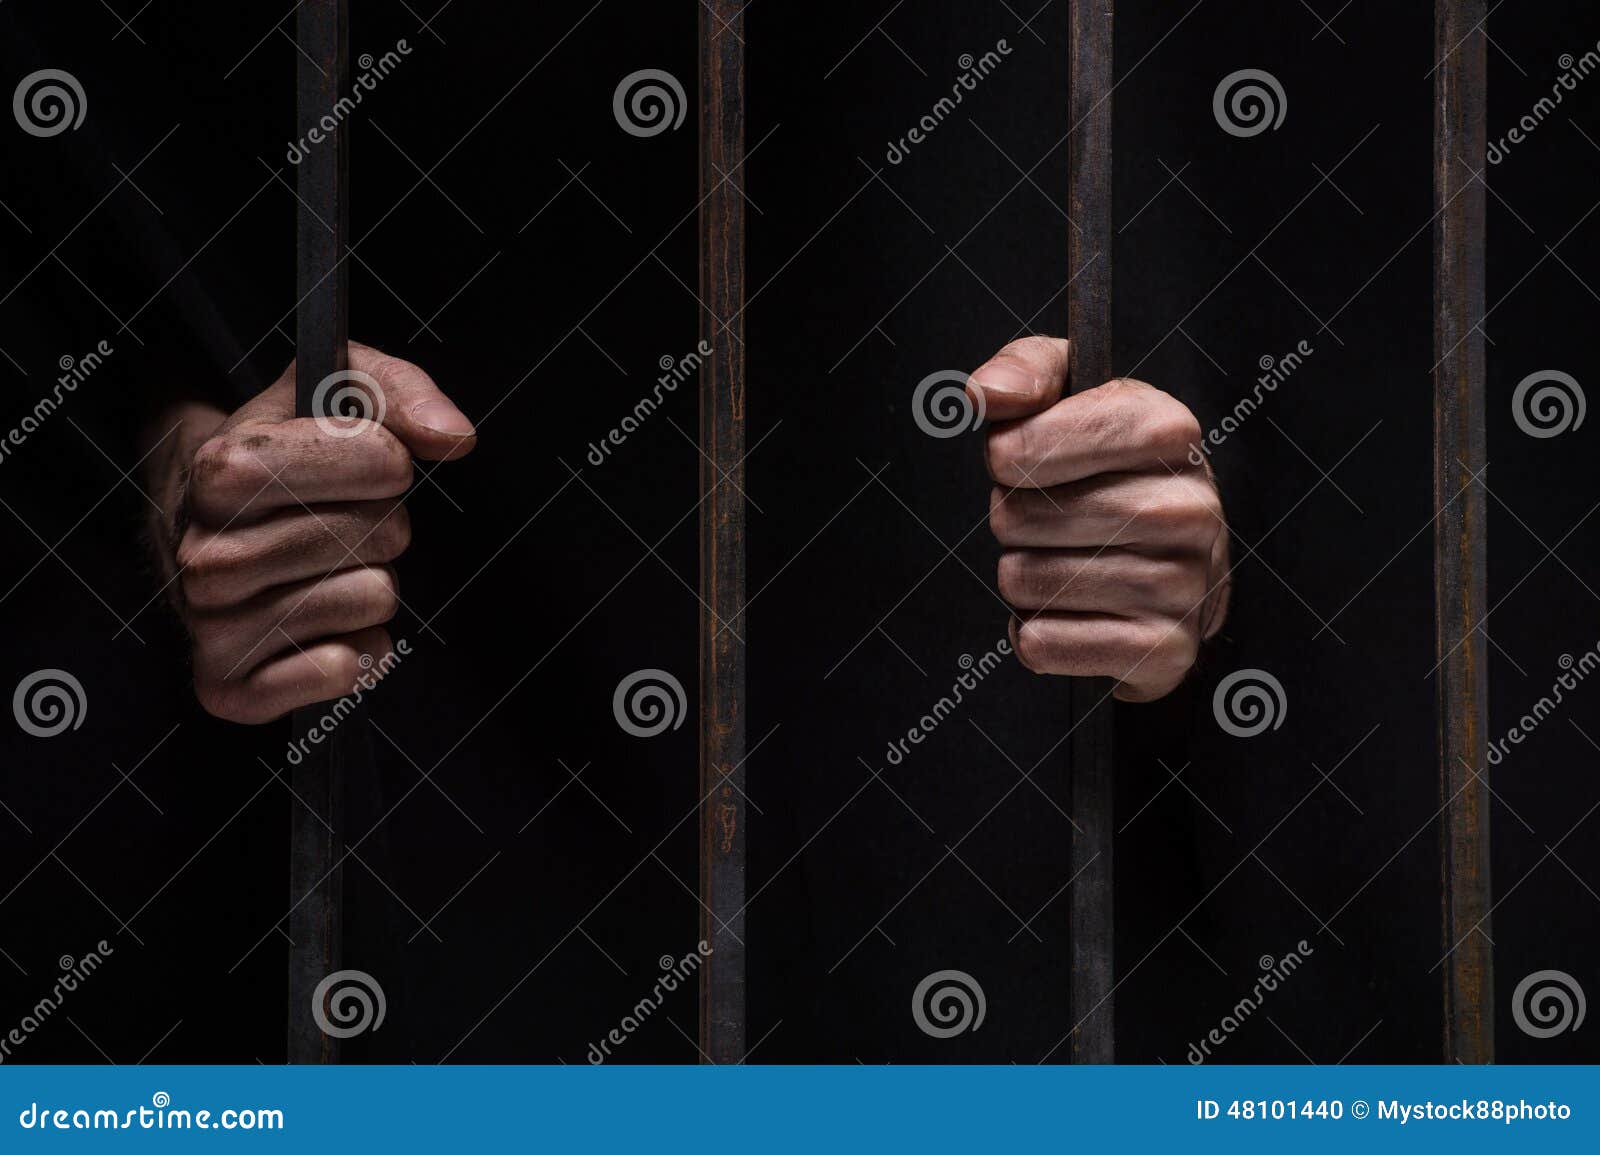 closeup on hands of man sitting in jail.